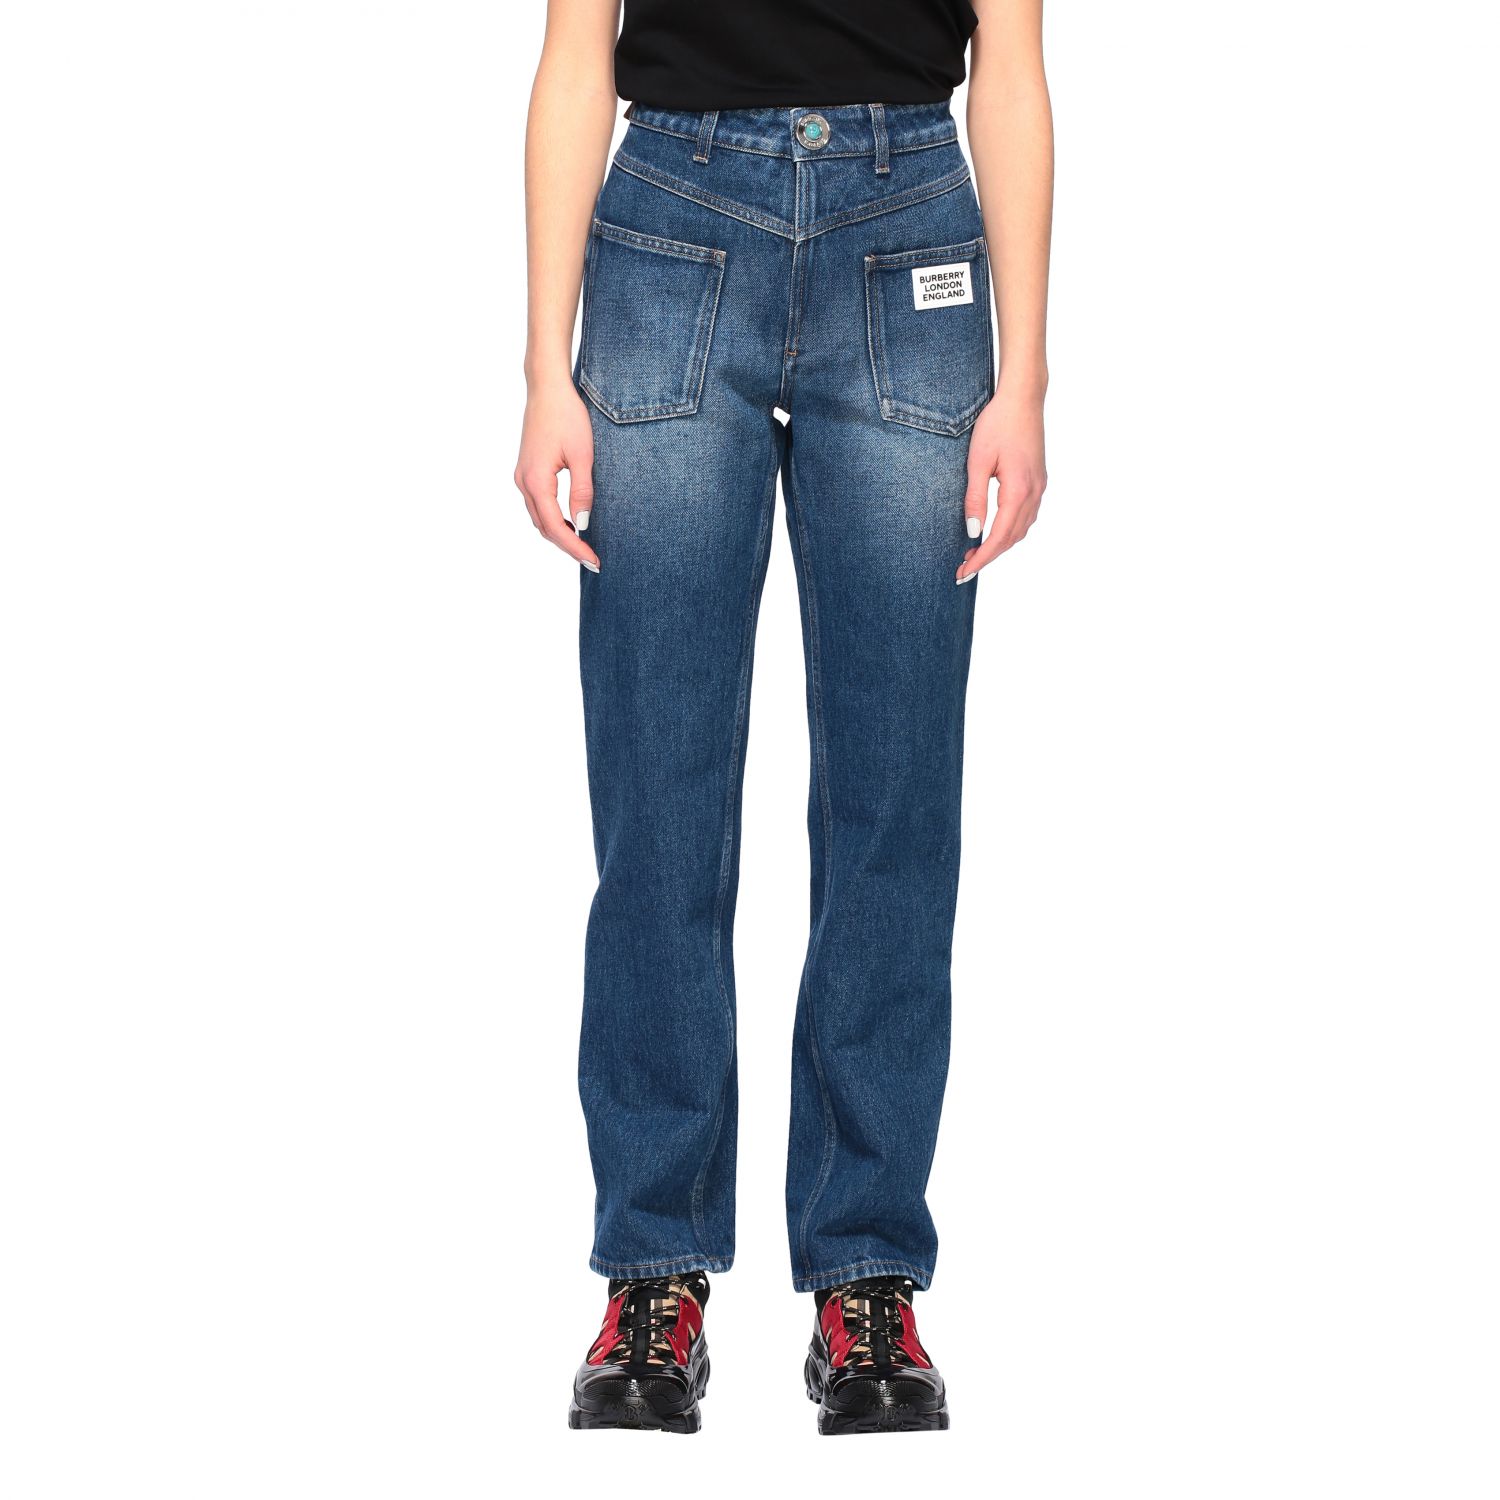 burberry jeans womens